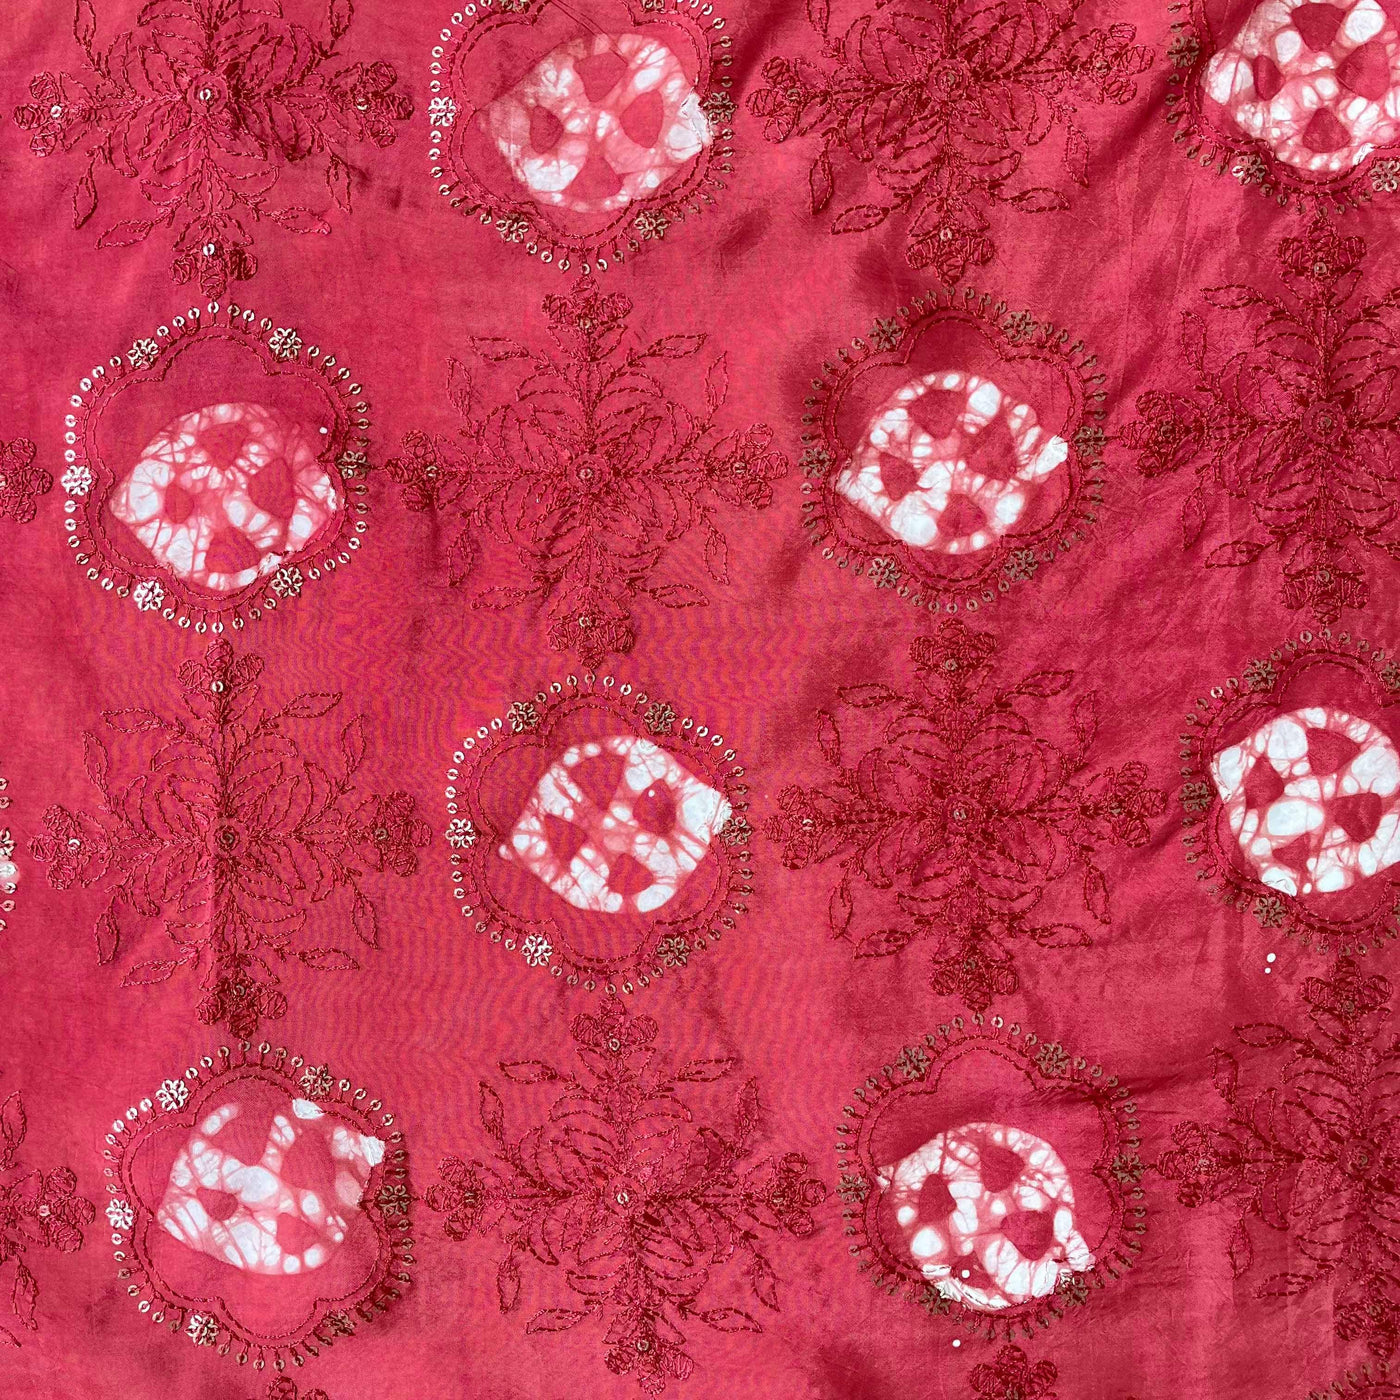 Embroidered Fabrics Fabric Rose Red Sequence Embroidered Batik Printed Pure Crepe Fabric (Width 42 Inches)